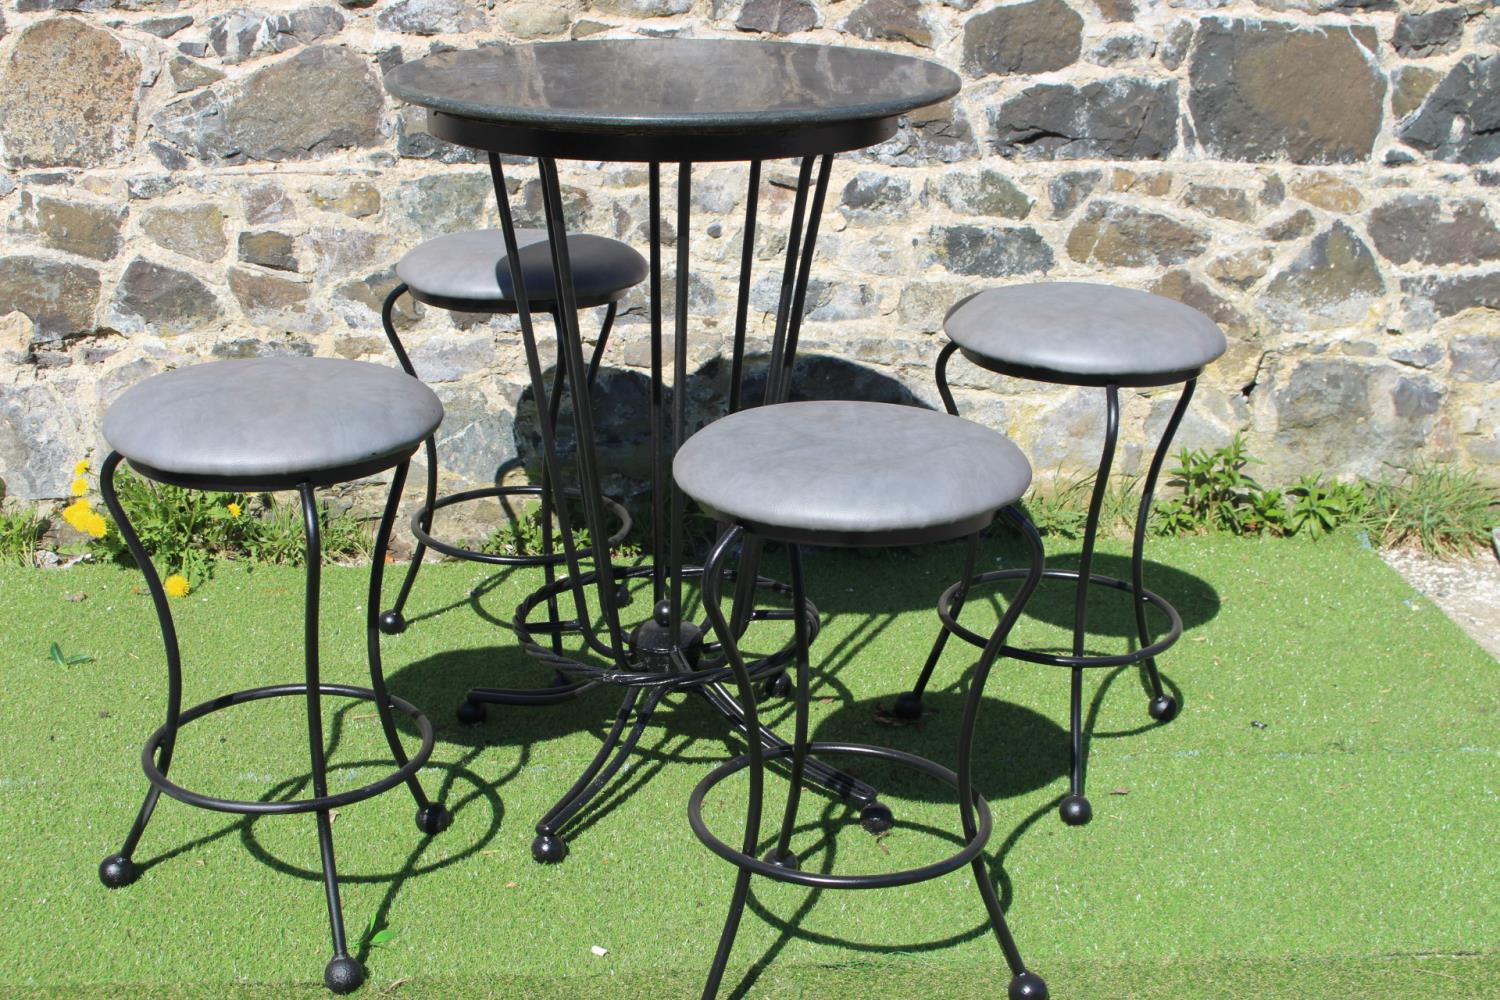 Wrought iron drinks stand